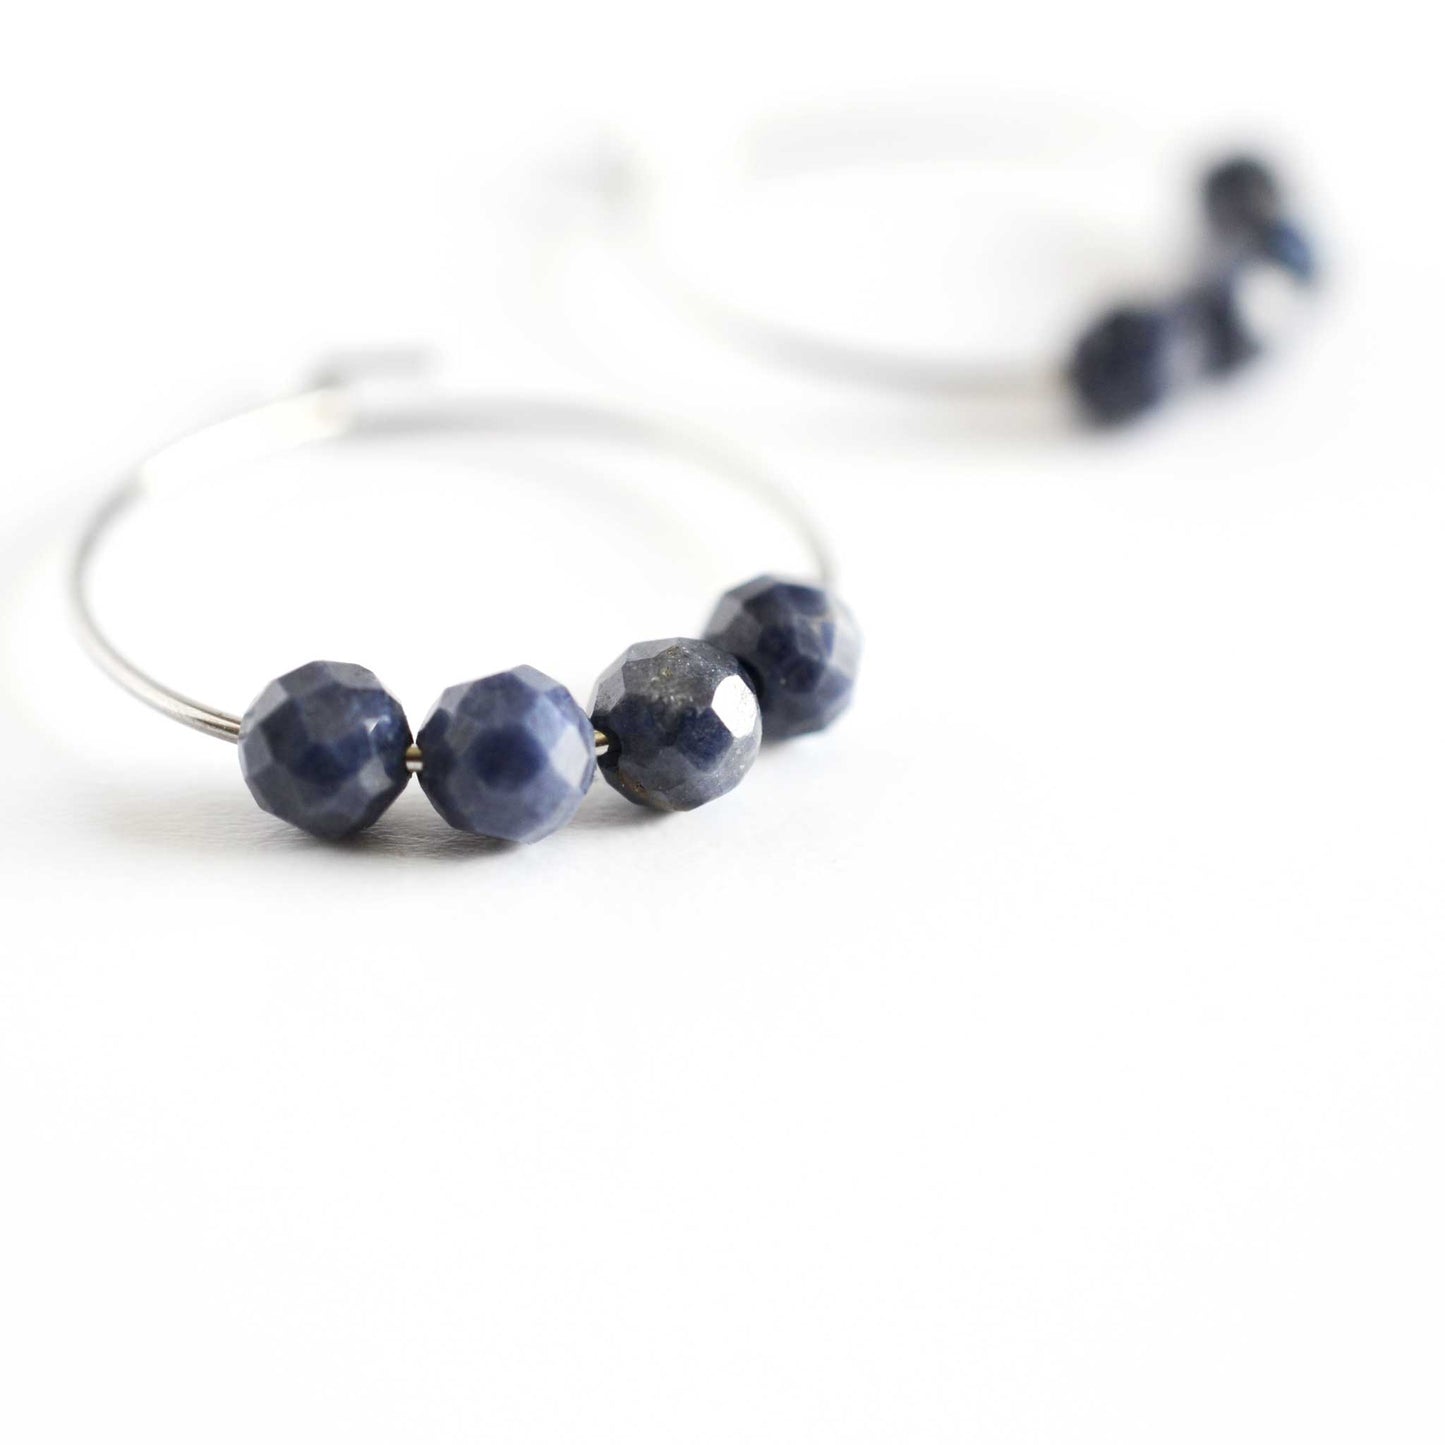 Close up of Sapphire hoop earrings with four small round faceted natural Sapphire beads